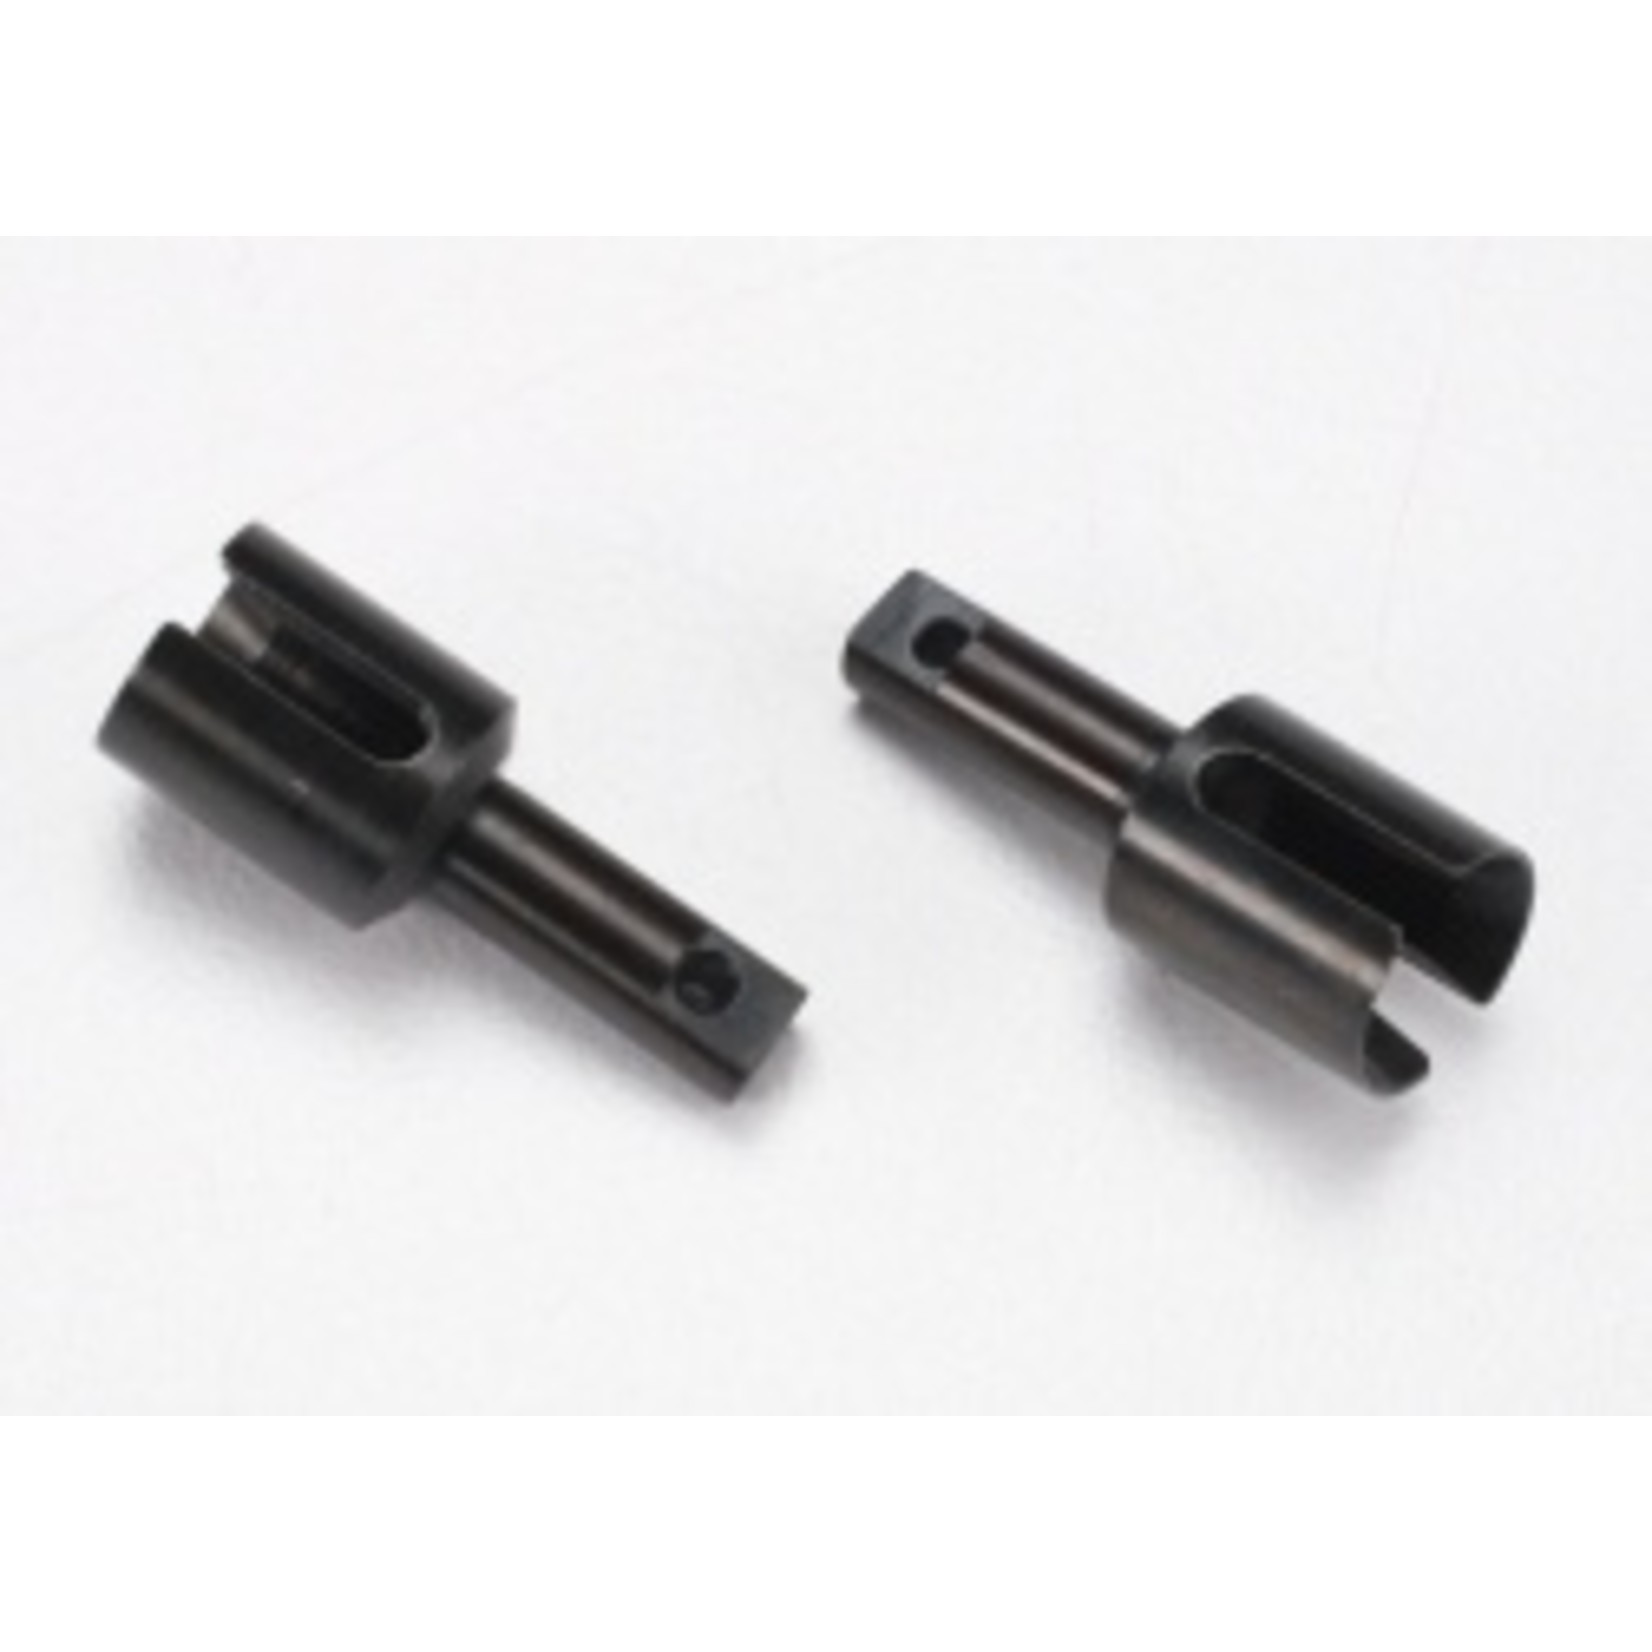 Traxxas Drive cups, inner (2) (steel constant-velocity driveshafts)